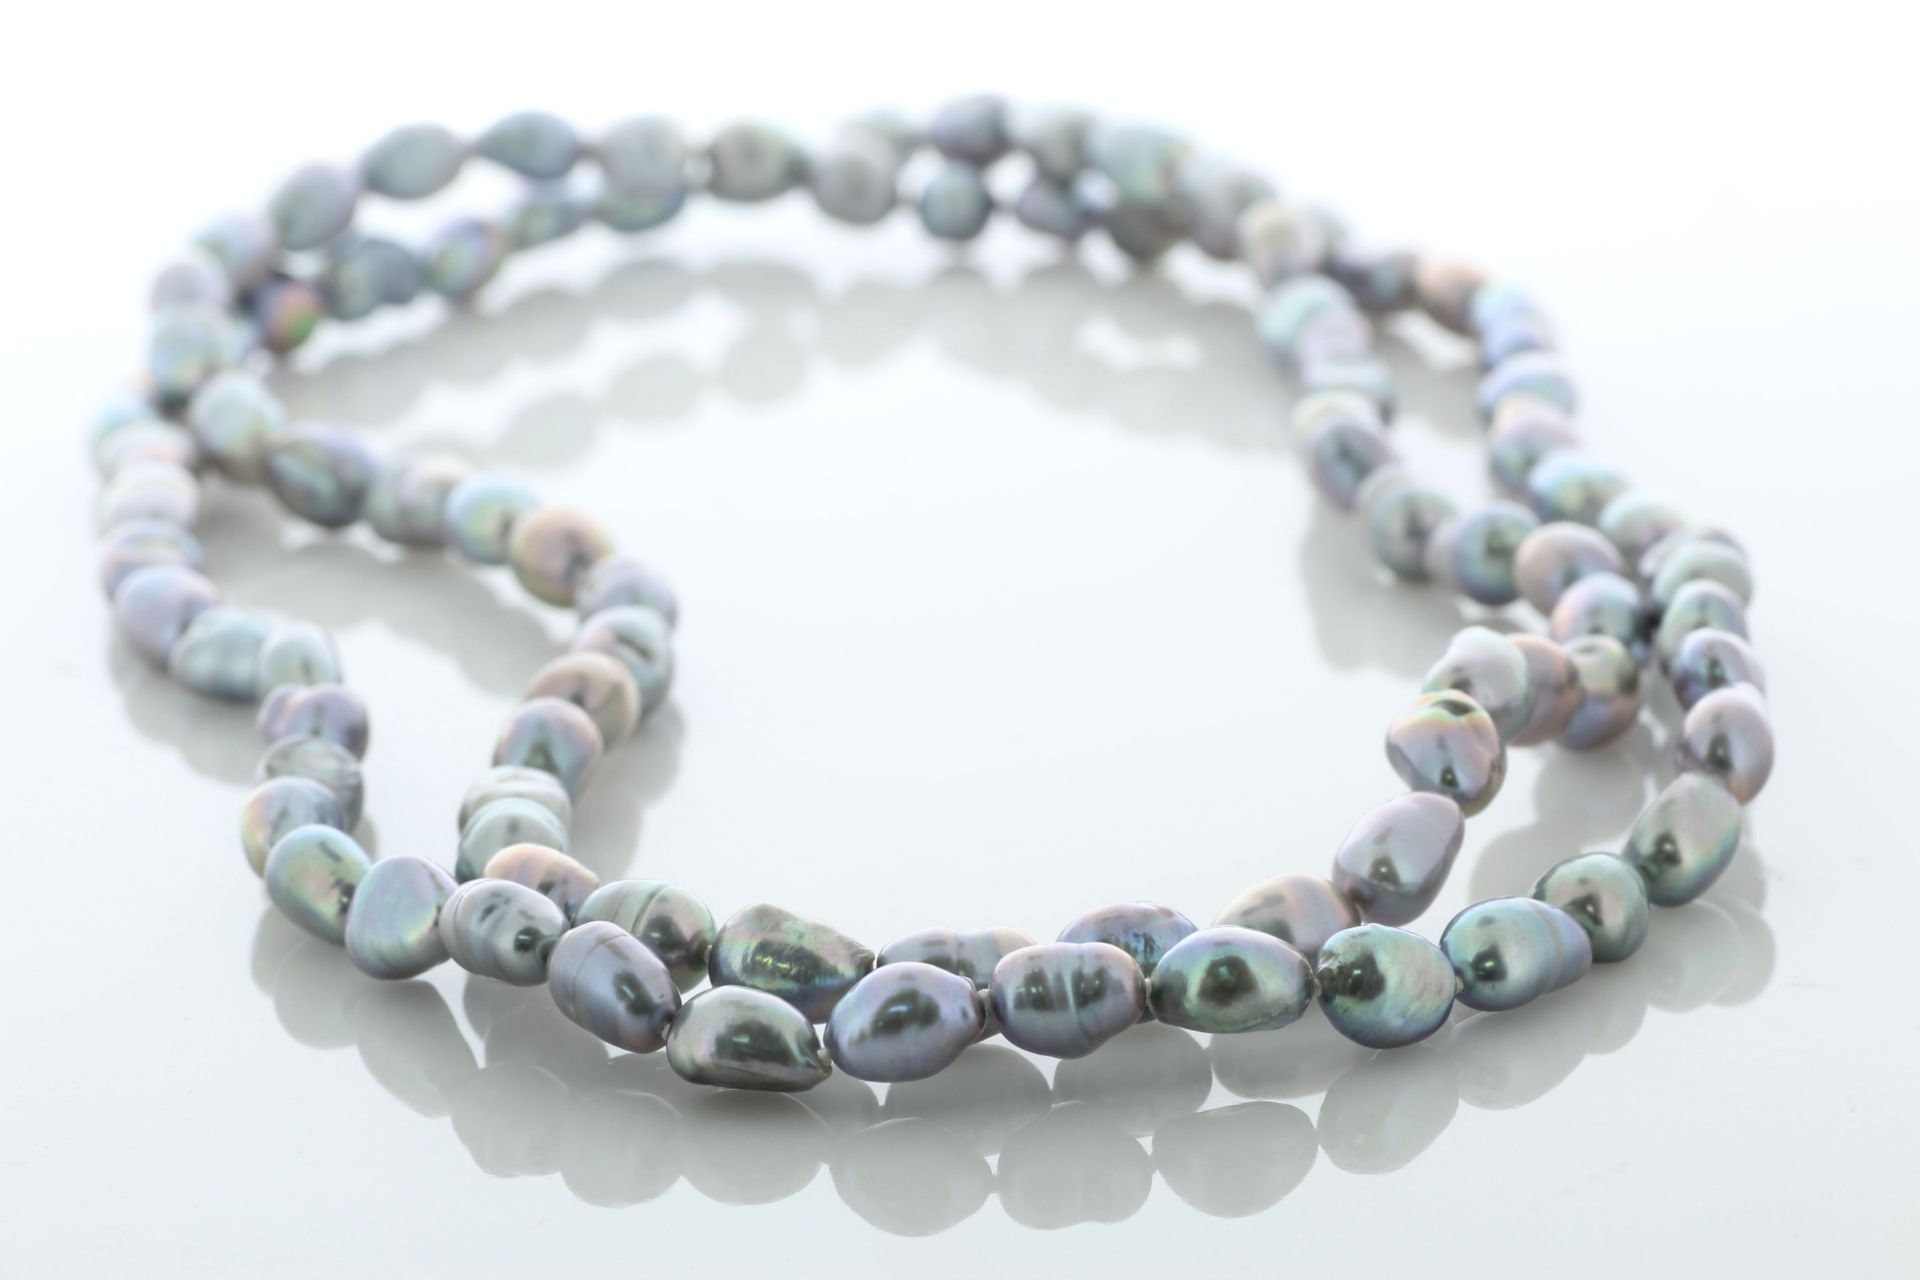 36 Inch Freshwater Cultured 6.5 - 7.0mm Pearl Necklace - Valued By AGI £340.00 - 6.5 - 7.0mm